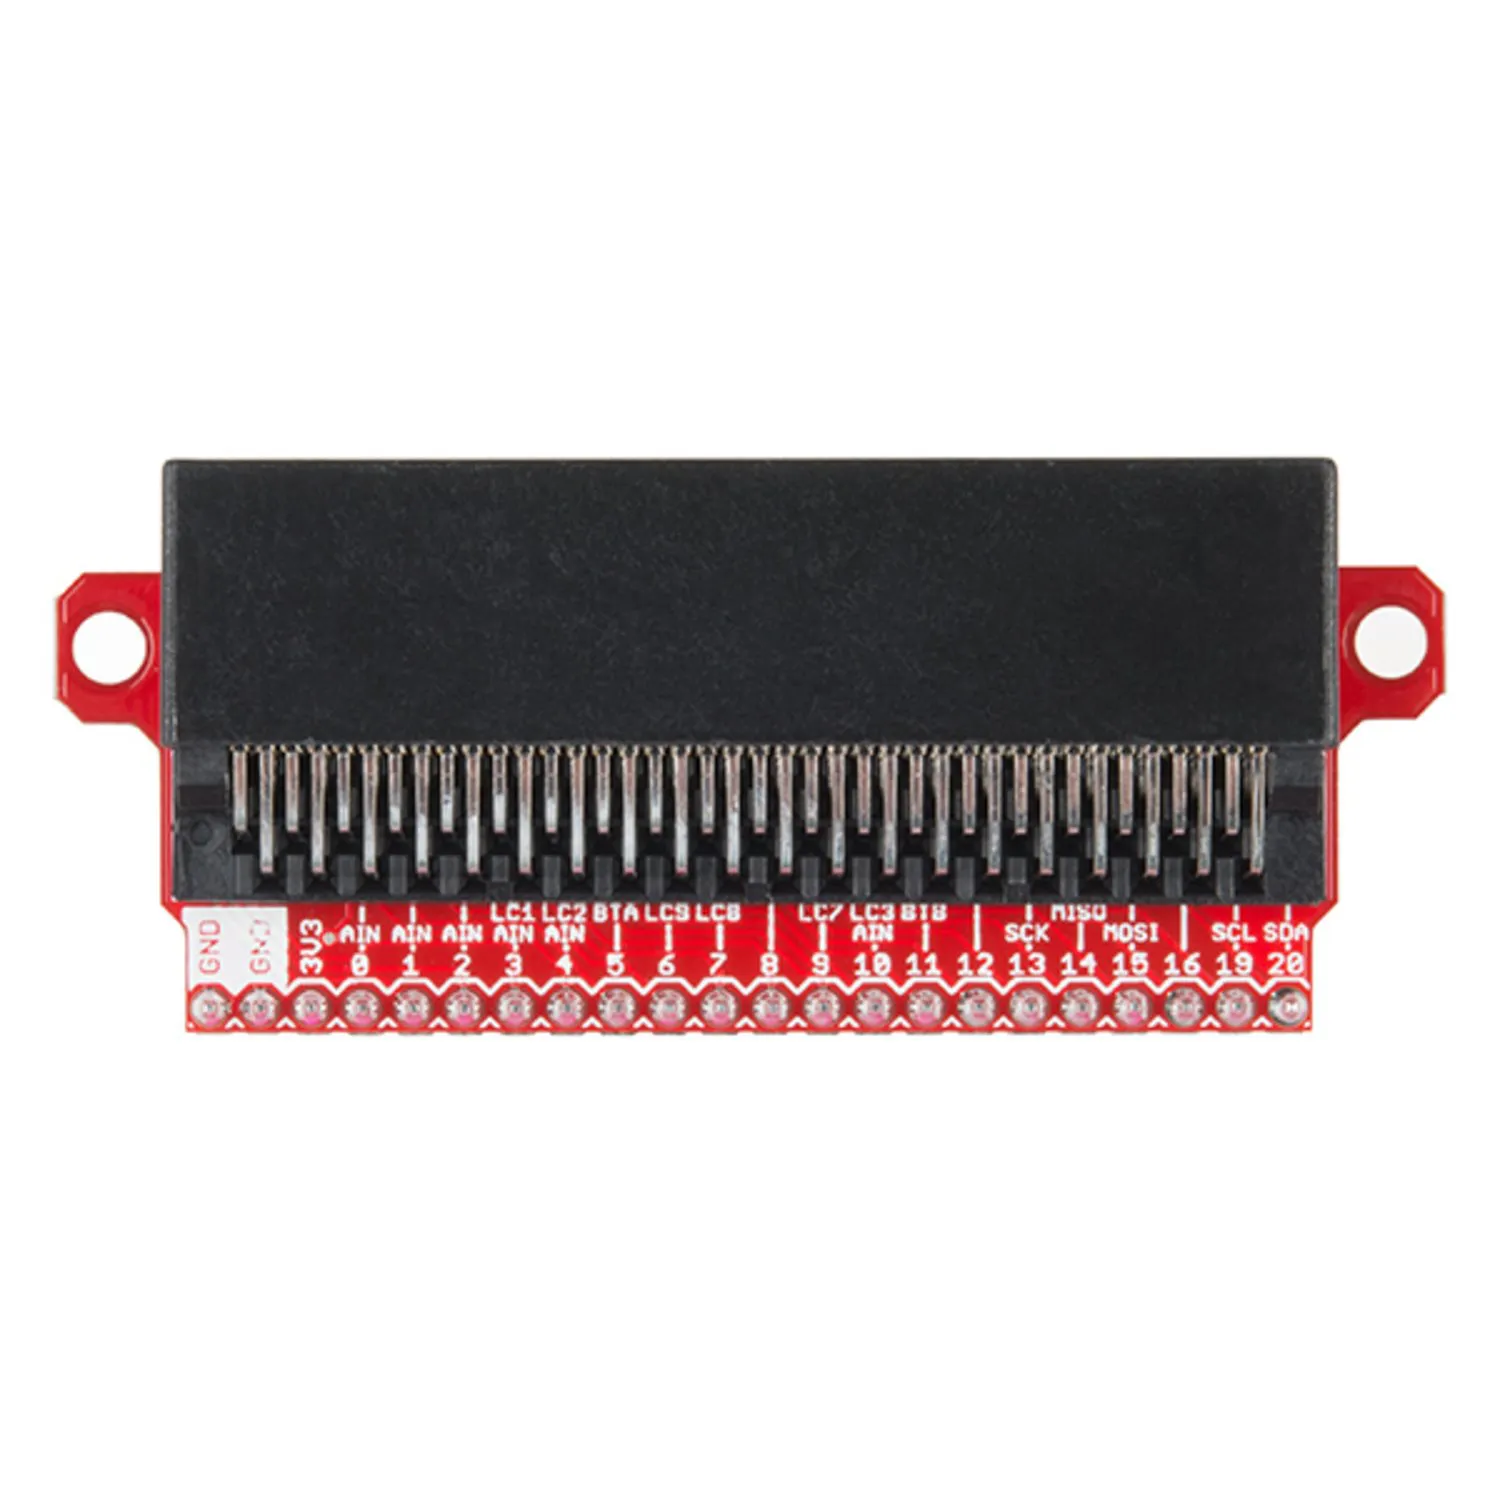 Photo of SparkFun micro:bit Breakout (with Headers)